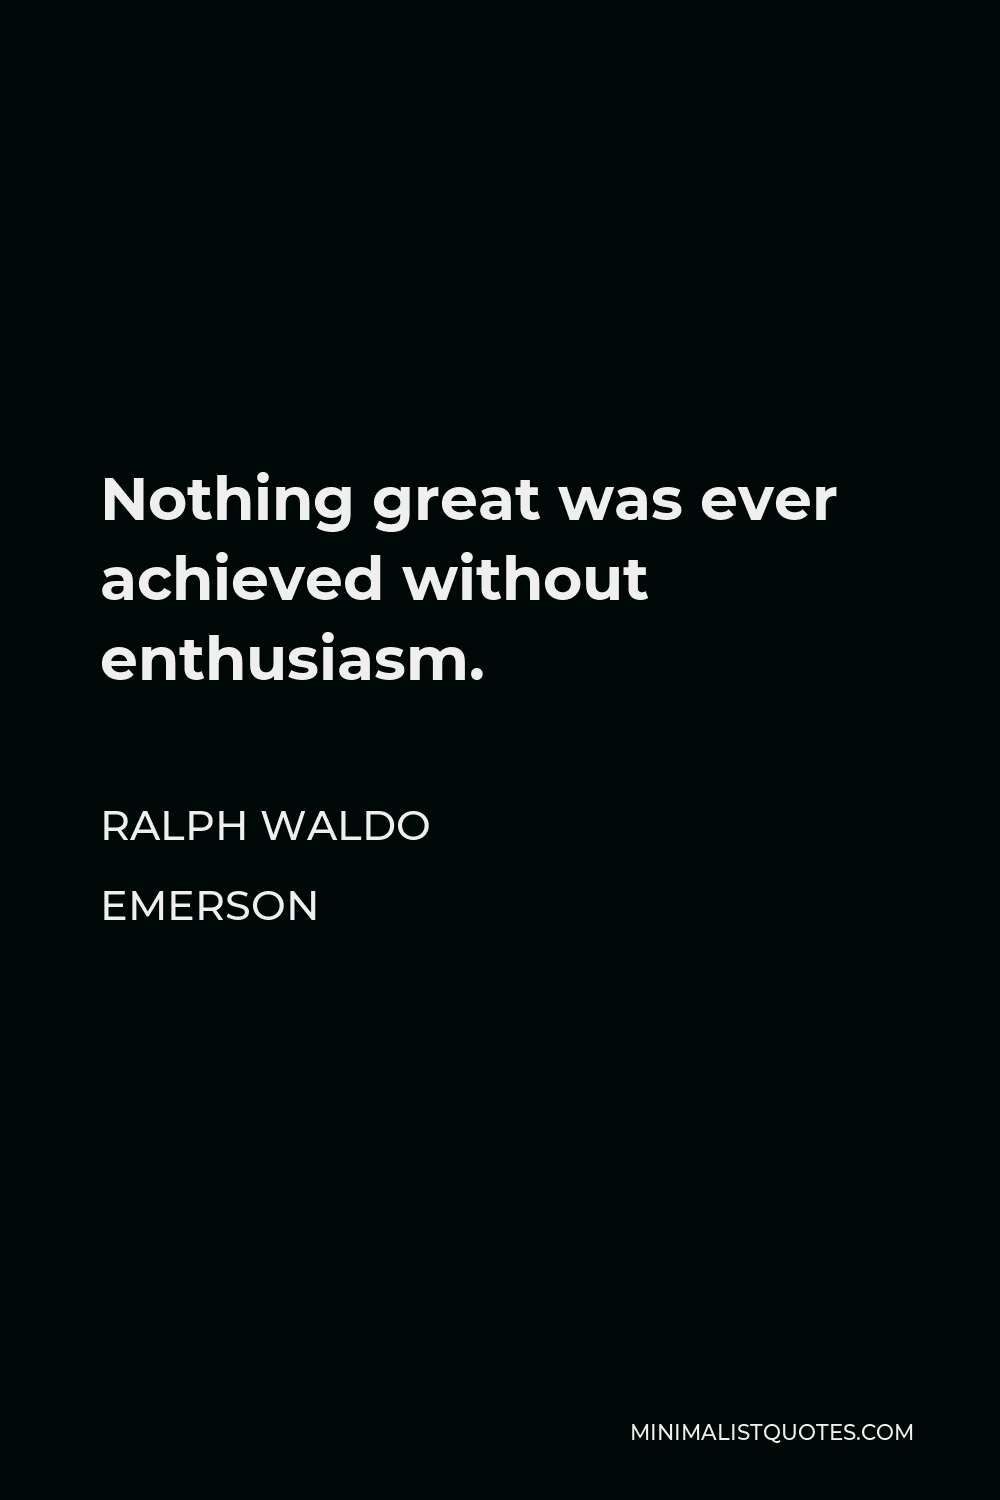 Mary Kay Ash Quote - Nothing great was ever achieved without enthusiasm.